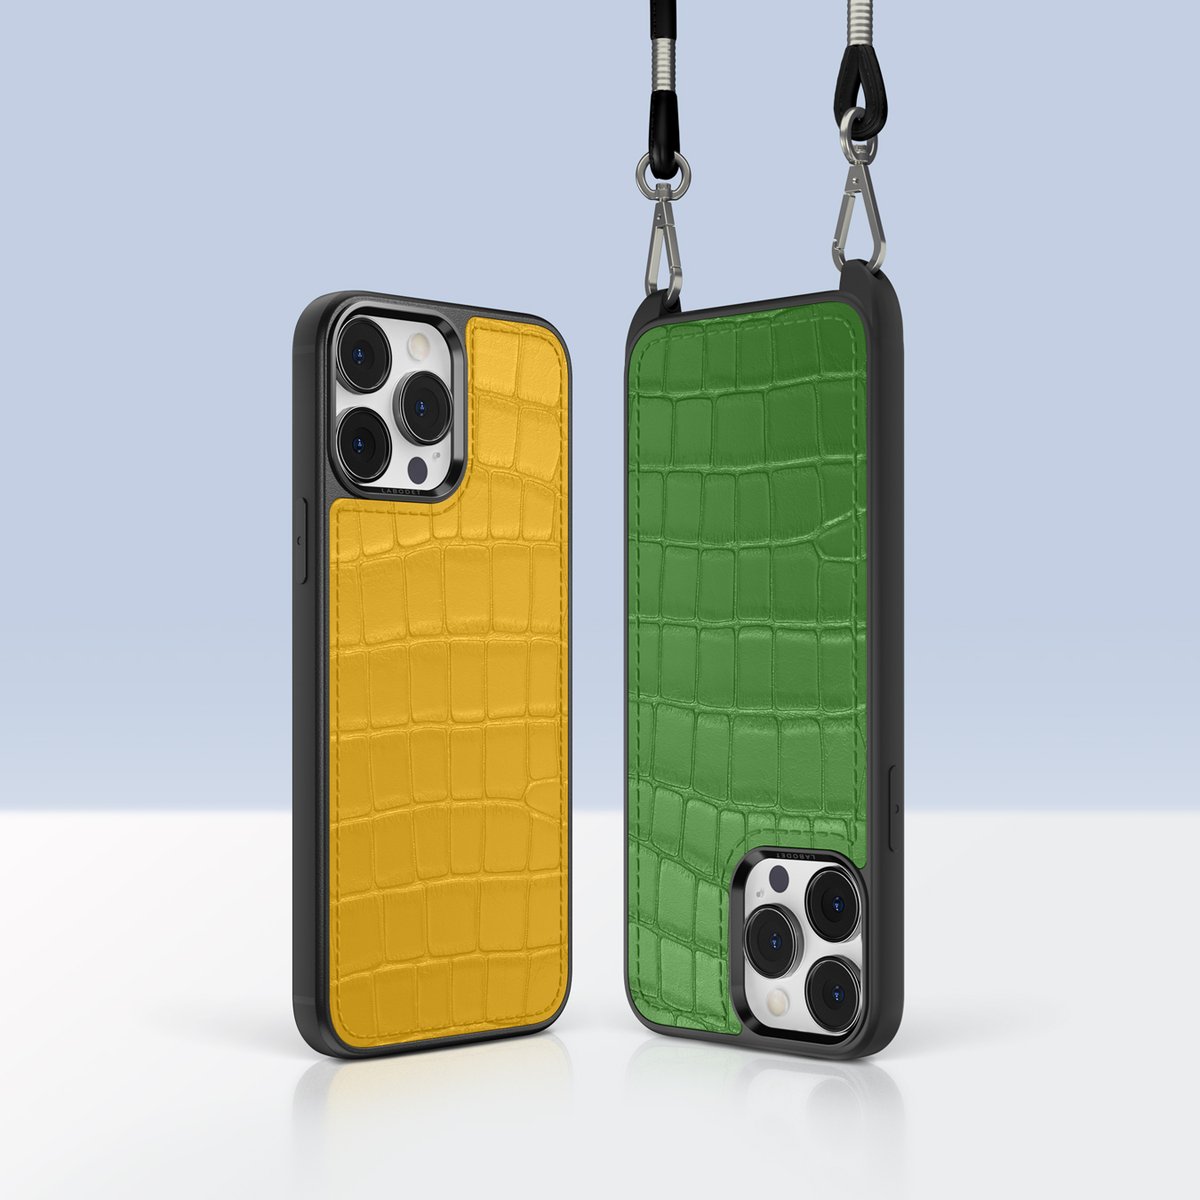 Wear your iPhone case protected in luxury with the sport case variations. Protected edges and genuine exotic leather design pair great with your summer experiences. labodet.com/collections/ip… 
#Labodet #MadeinFrance #LuxuryTech #TechAccessories #LuxuryLifestyle